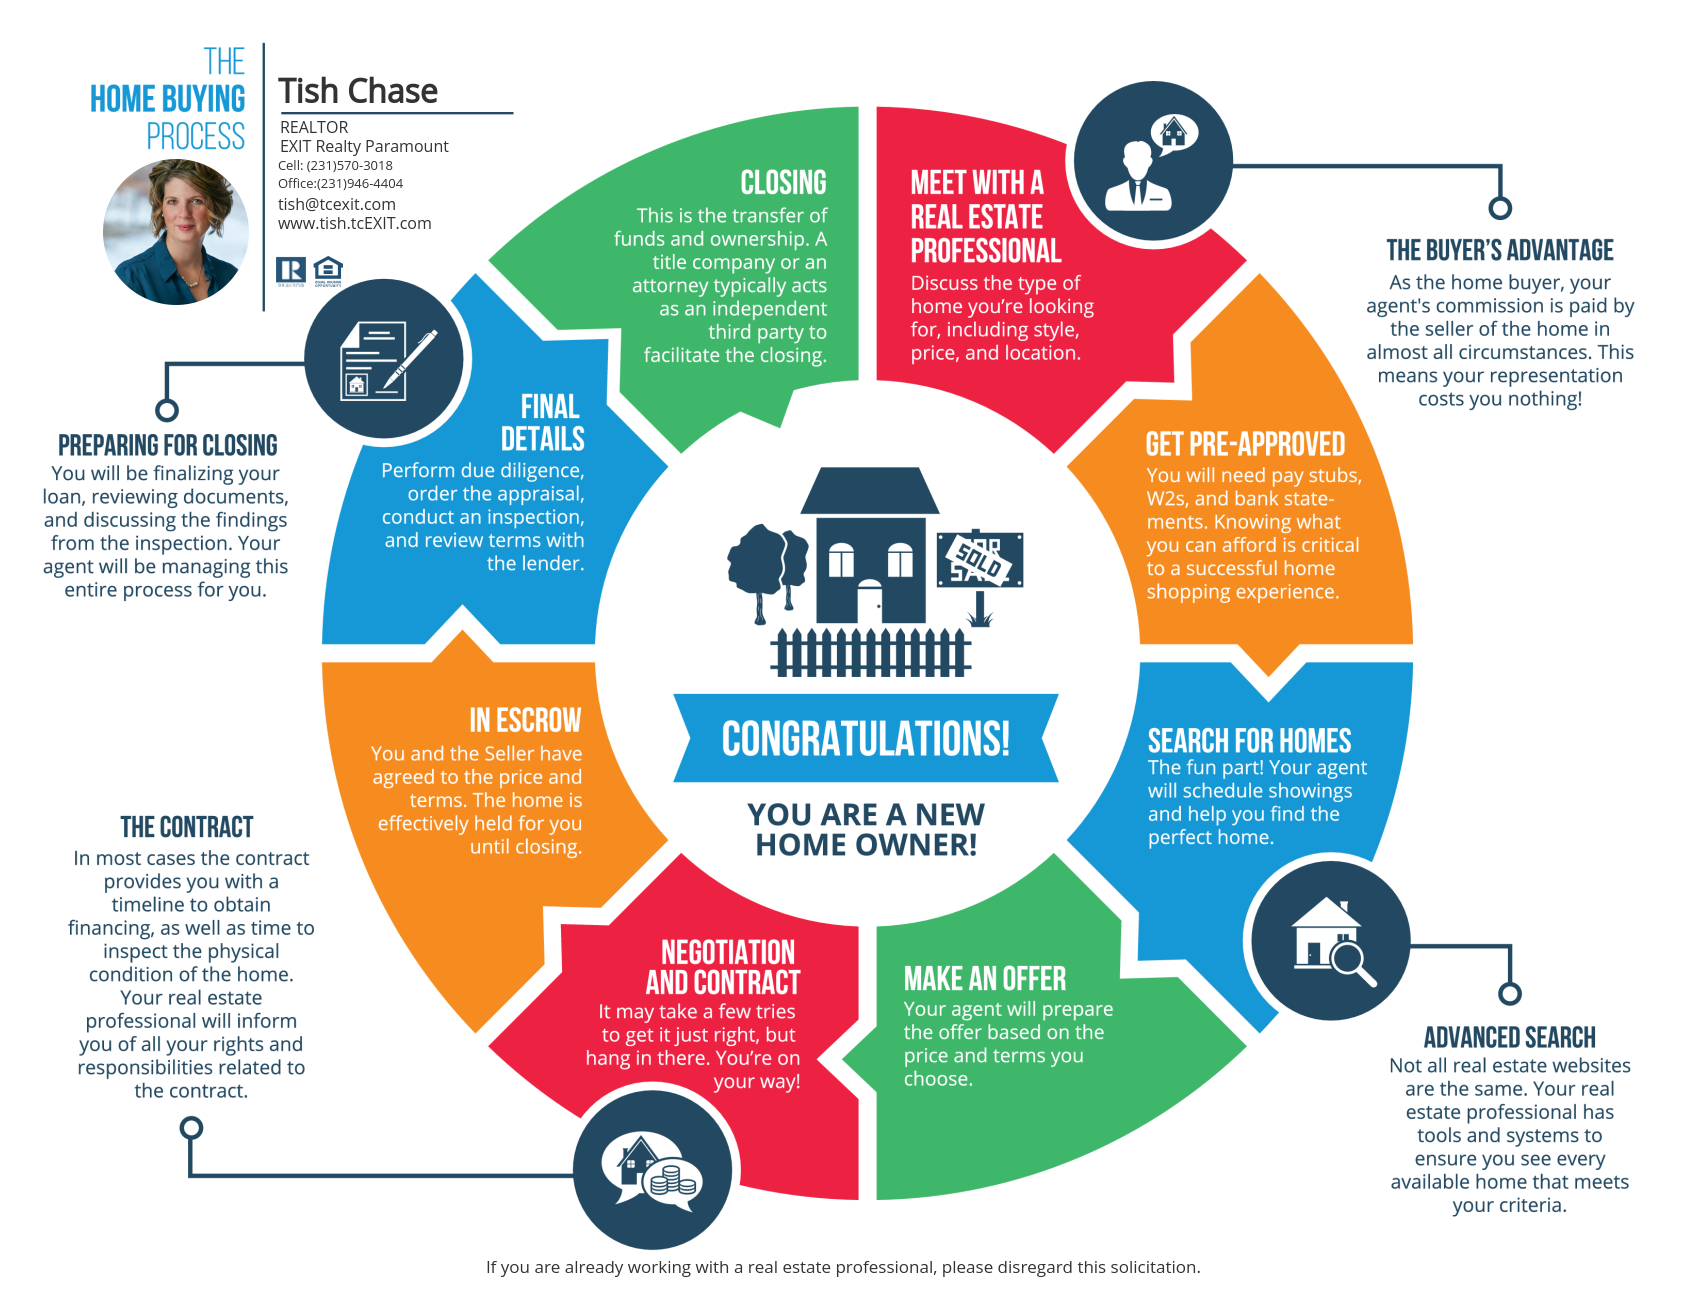 Roadmap to Home Buying